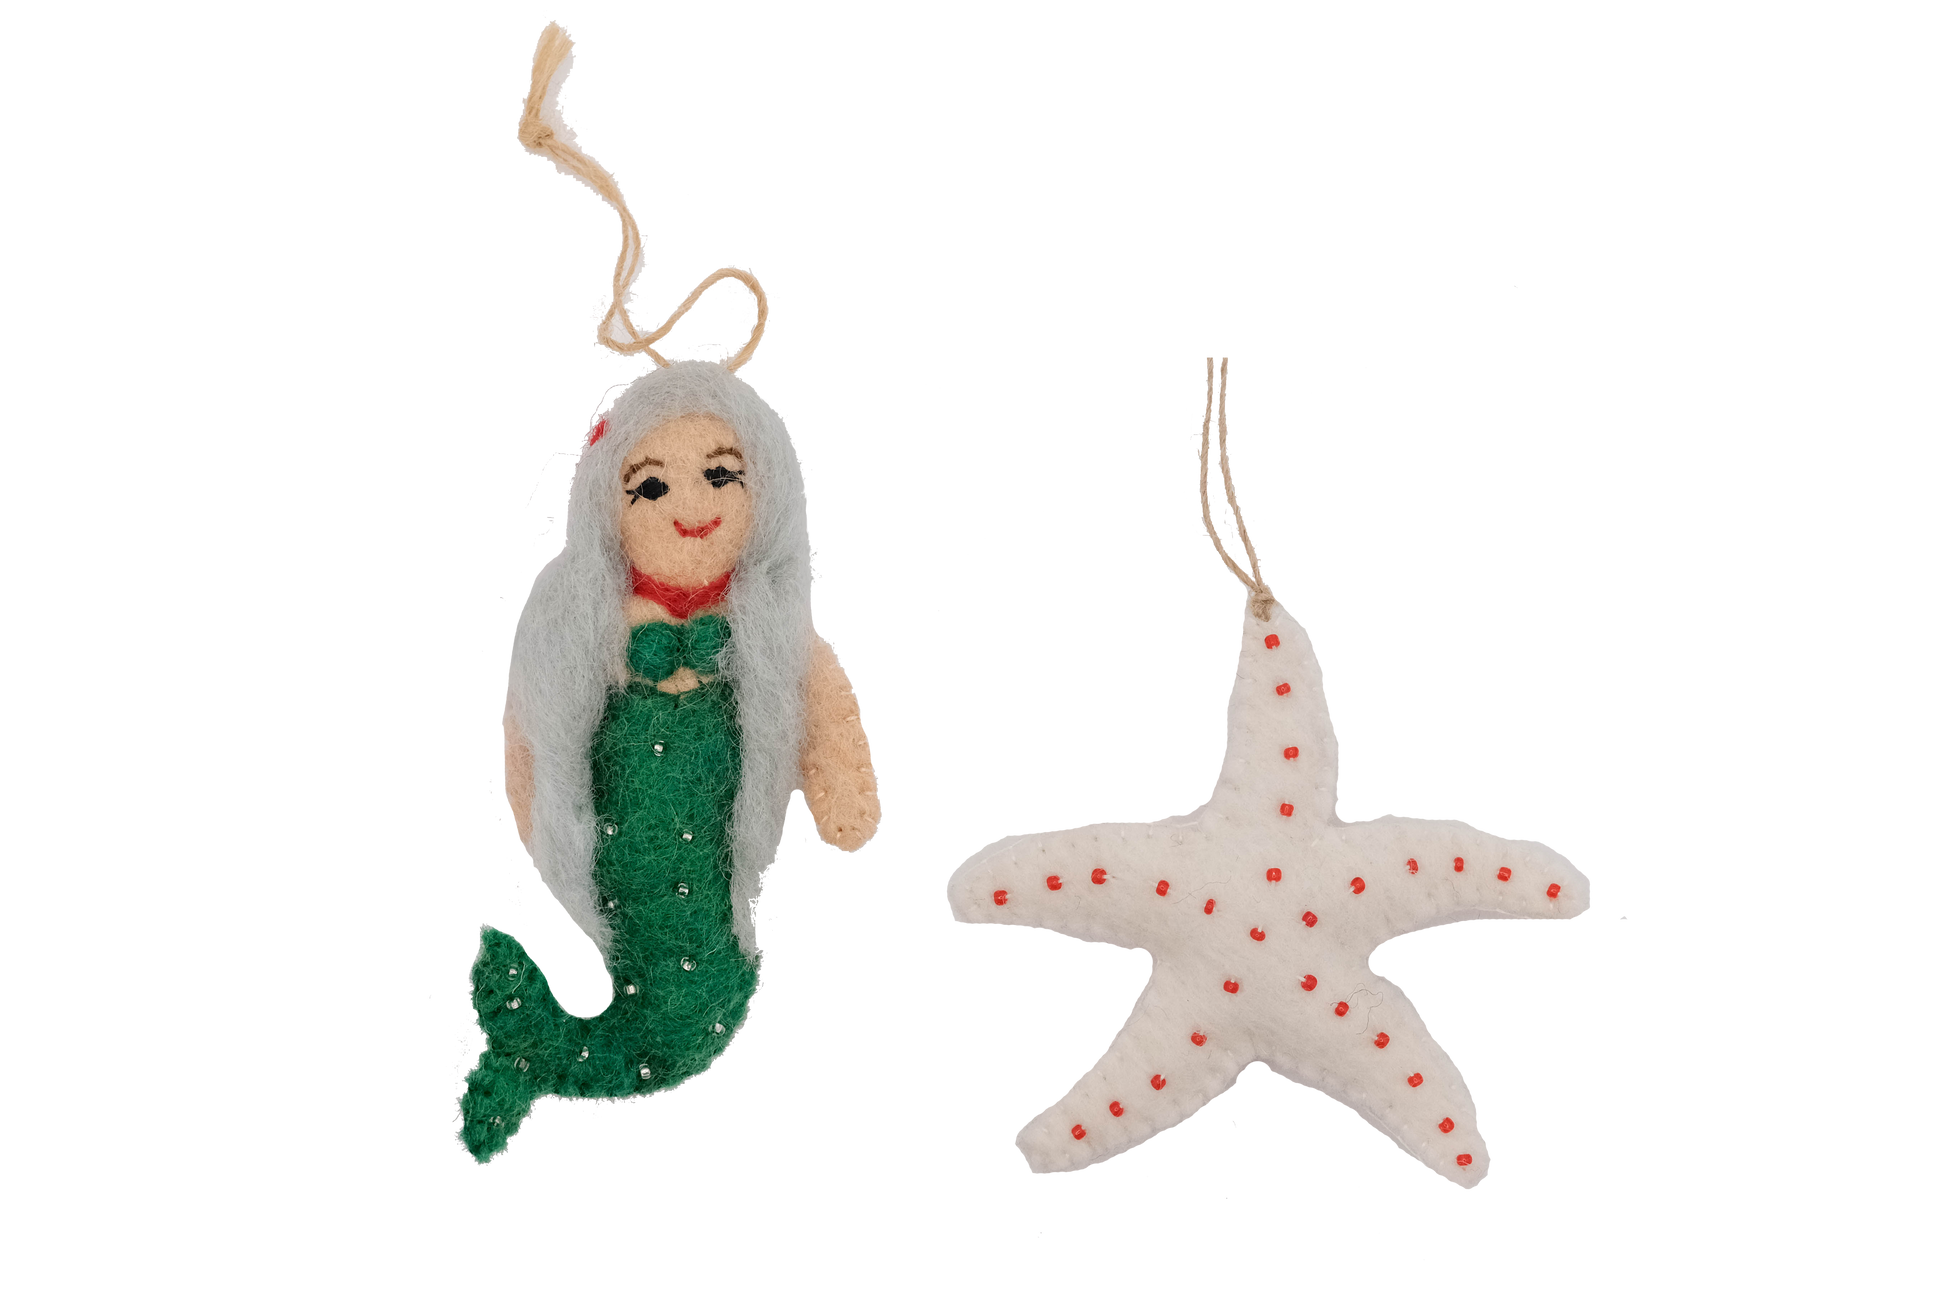 This Global Groove Life, handmade, ethical, fair trade, eco-friendly, sustainable, green, white and red, felt Mermaid with Starfish ornament set was created by artisans in Kathmandu Nepal and will be a beautiful addition to your Christmas tree this holiday season.